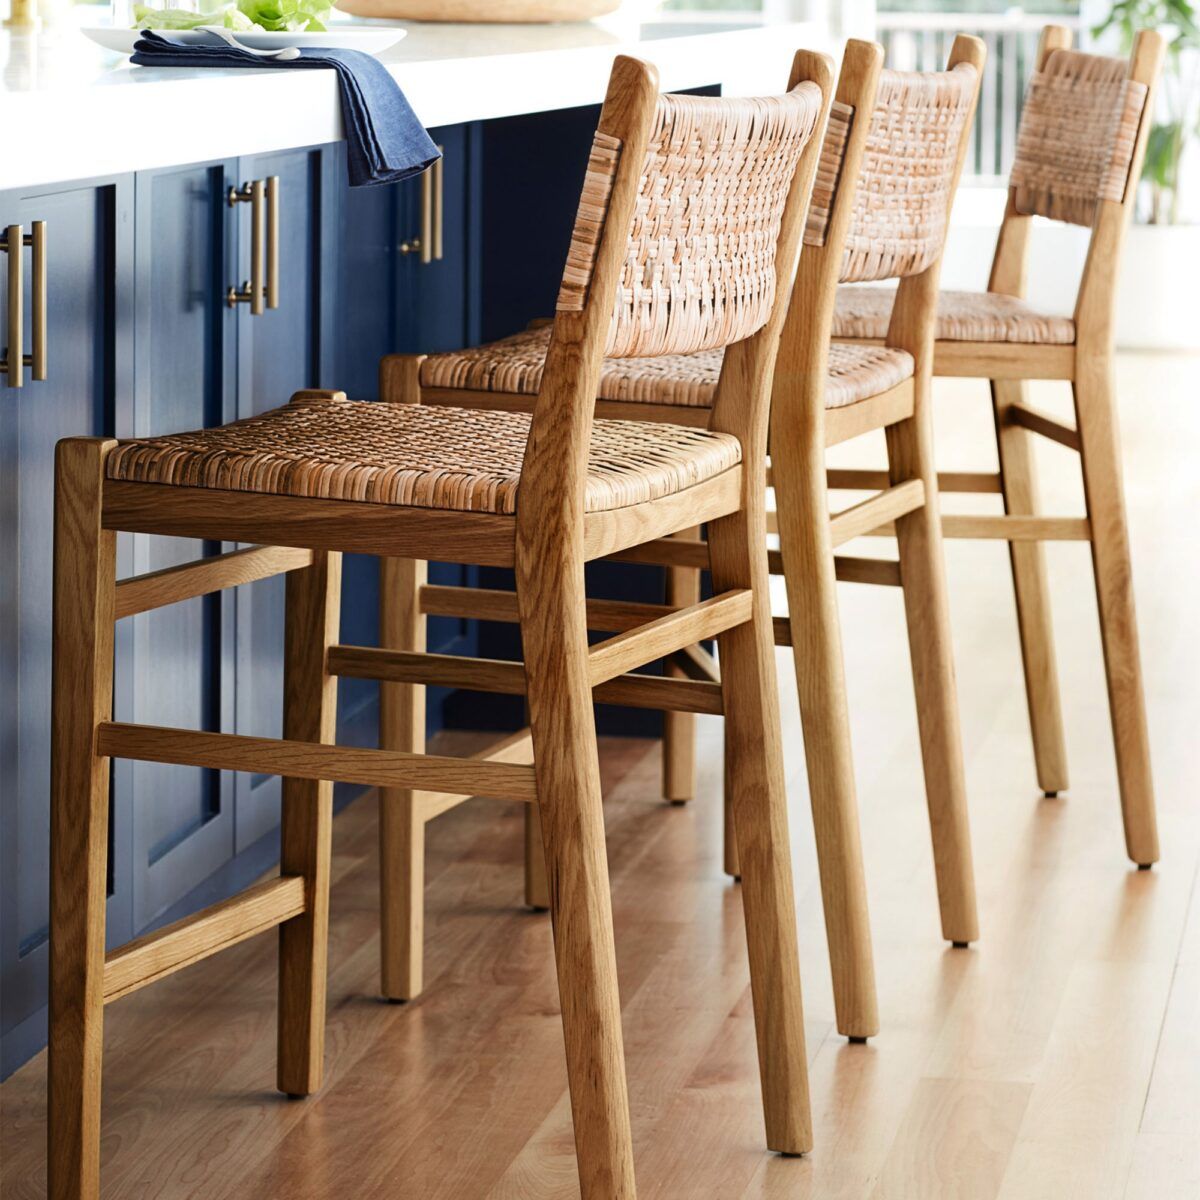 Upgrade Your Home Bar with Stylish Rattan Bar Stools